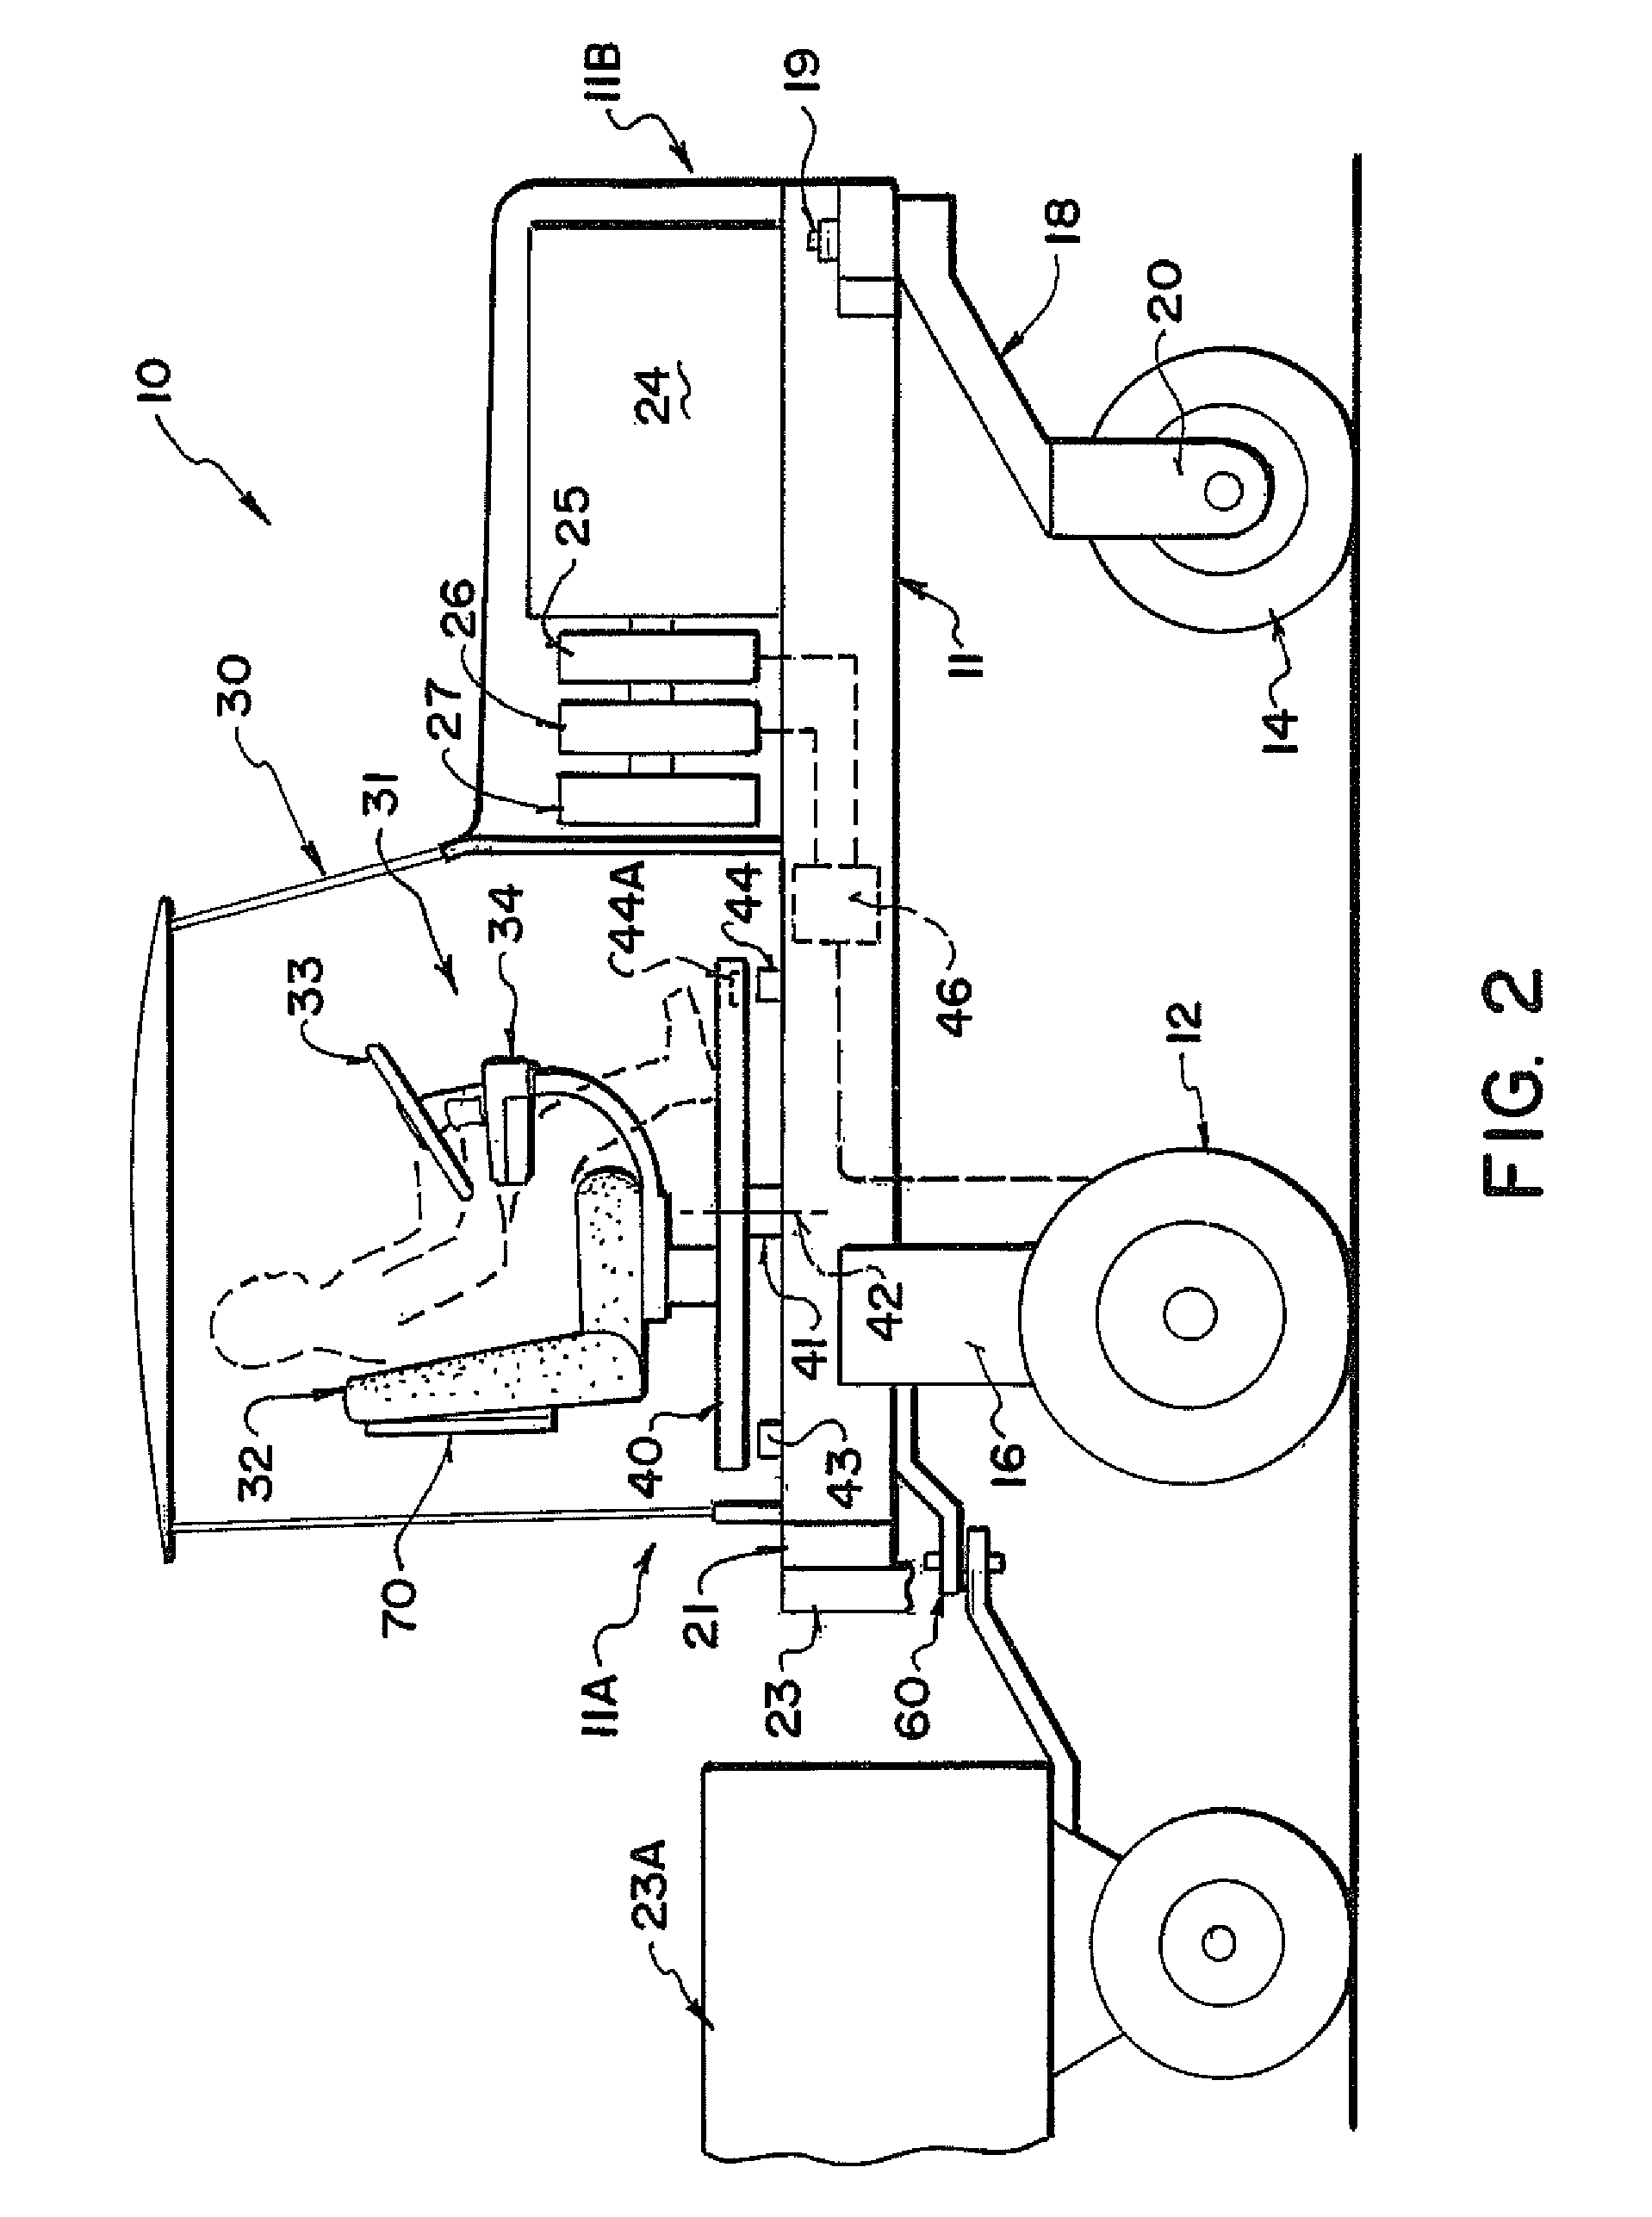 Tractor with automatic steering arrangement